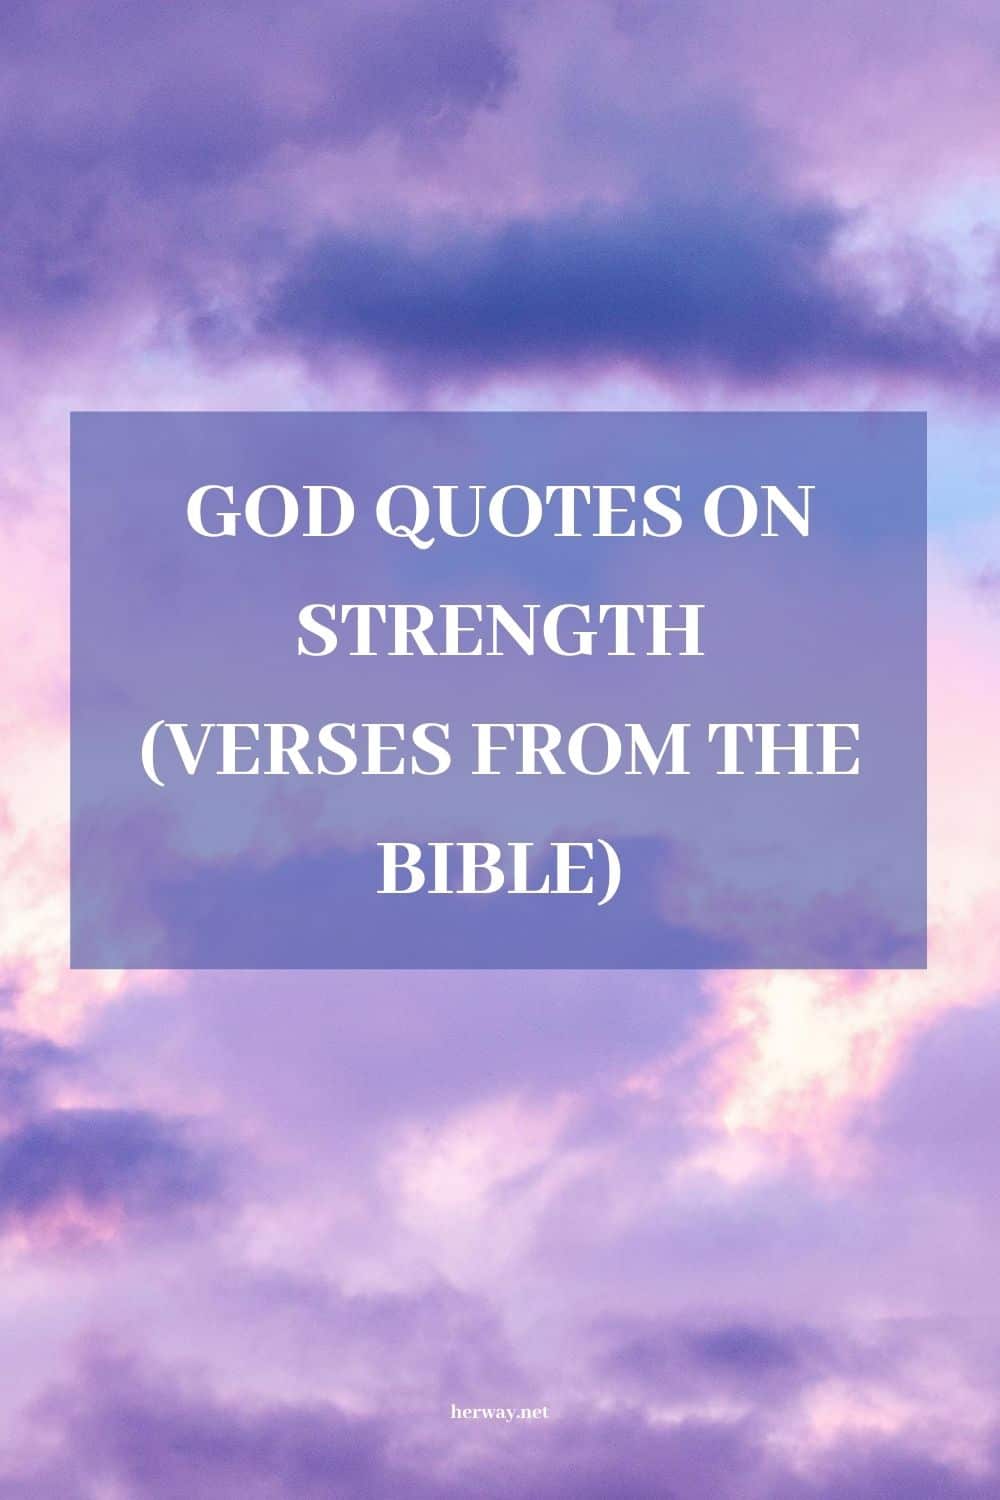 God Quotes Uplifting Sayings To Inspire And Empower You